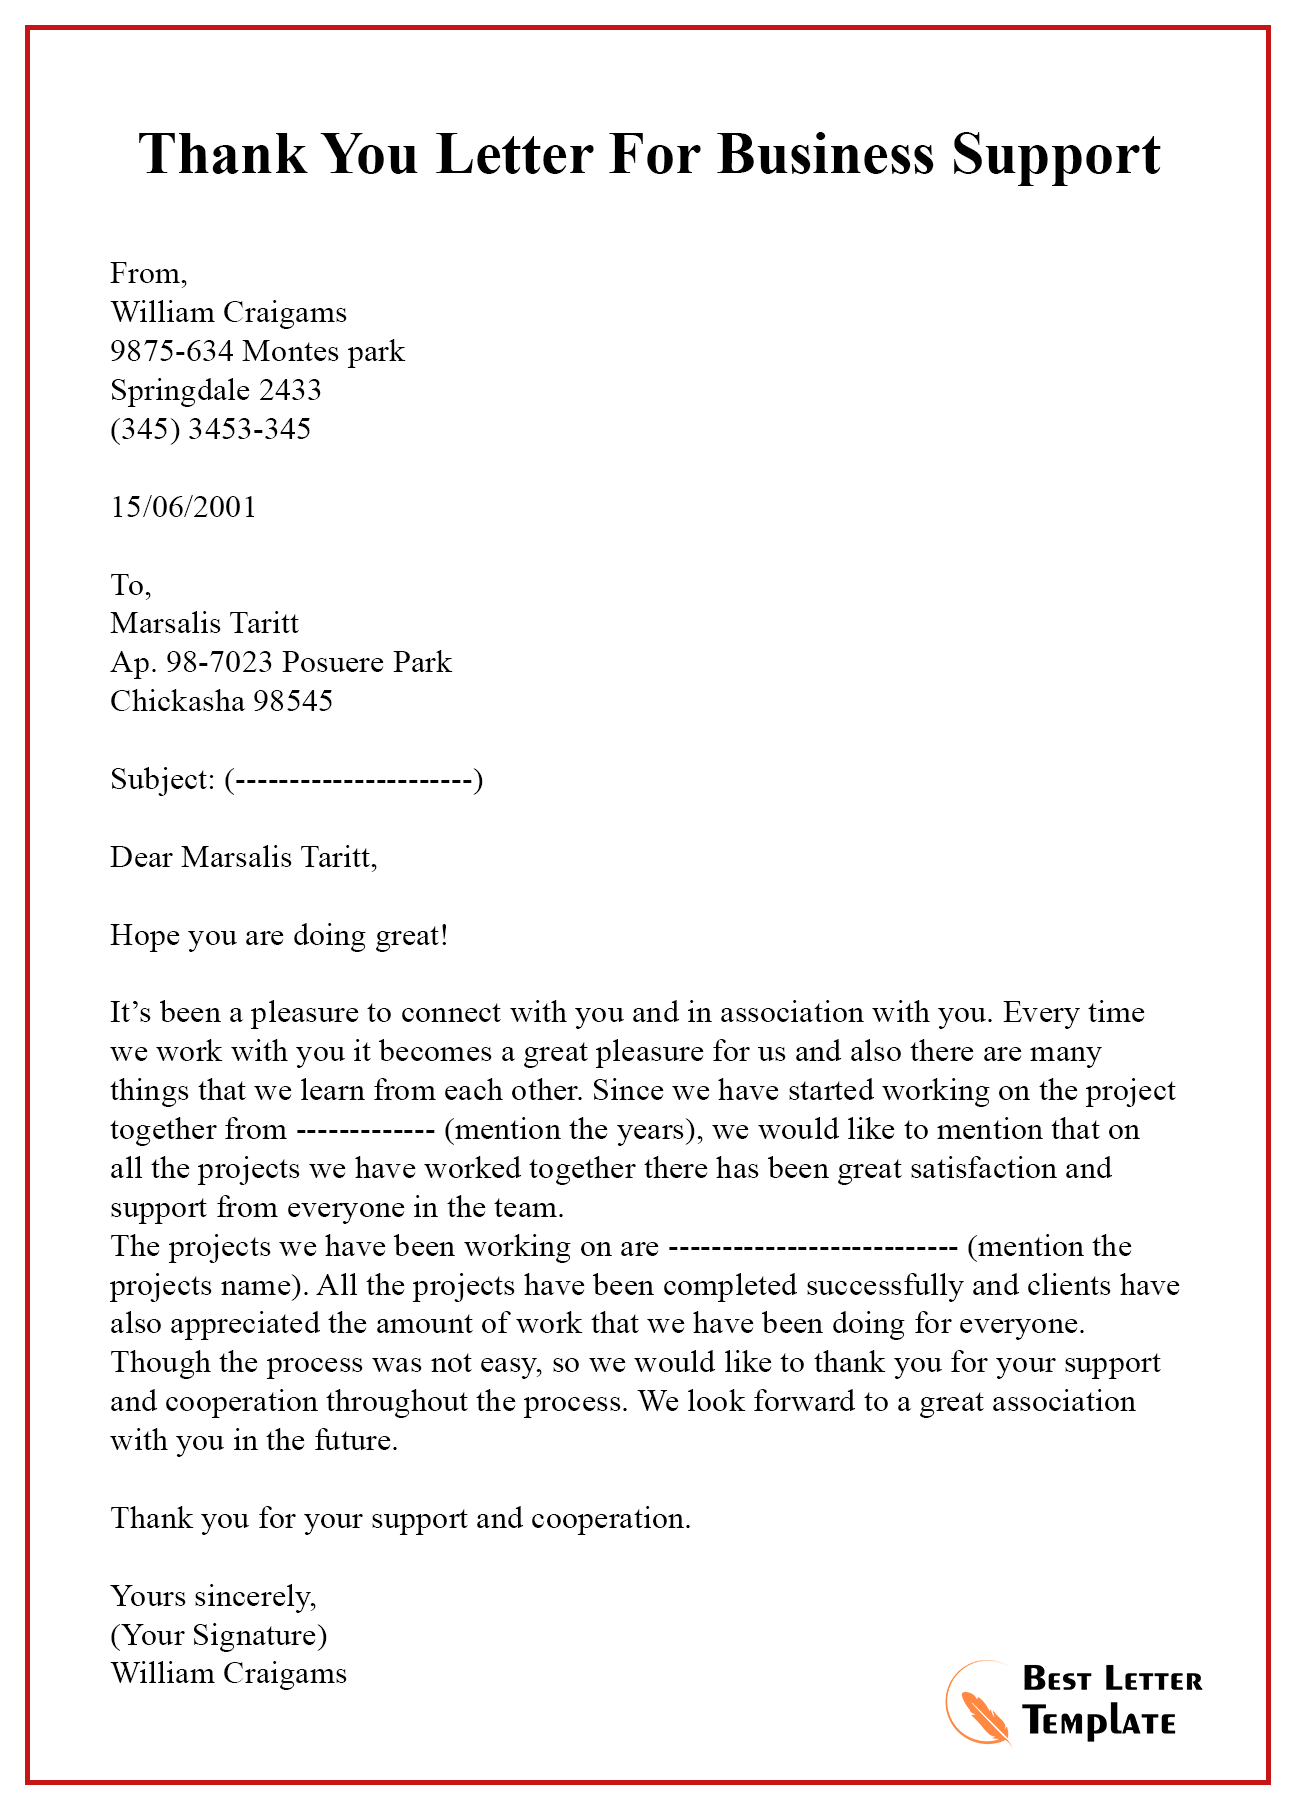 Thank You Letter Template for Support Sample & Examples